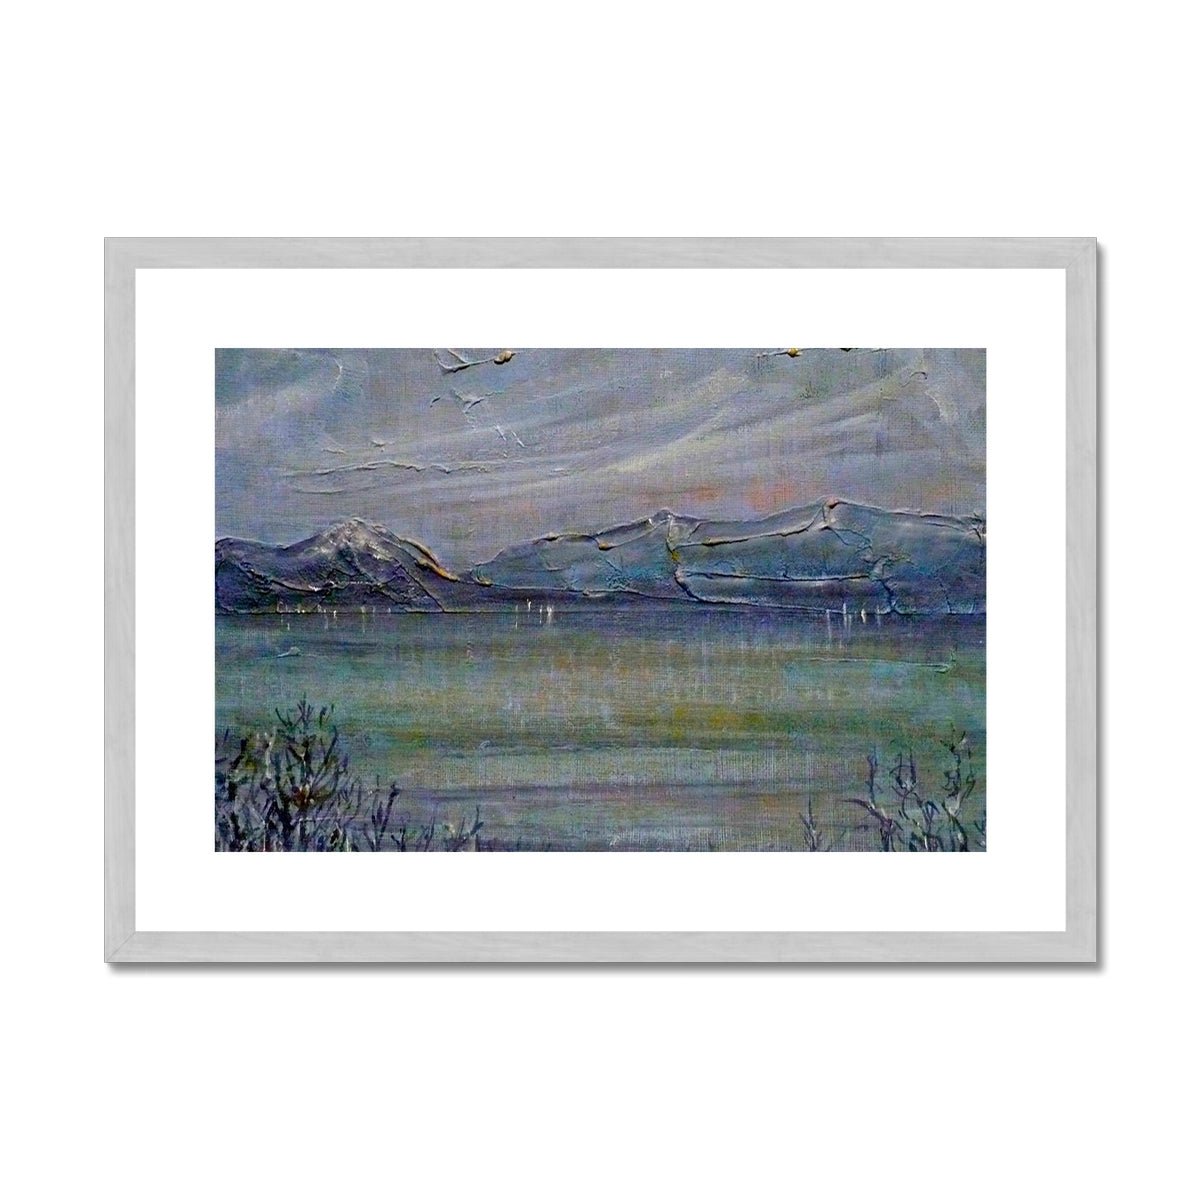 Loch Morlich Moonlight Painting | Antique Framed & Mounted Prints From Scotland-Antique Framed & Mounted Prints-Scottish Lochs & Mountains Art Gallery-A2 Landscape-Silver Frame-Paintings, Prints, Homeware, Art Gifts From Scotland By Scottish Artist Kevin Hunter